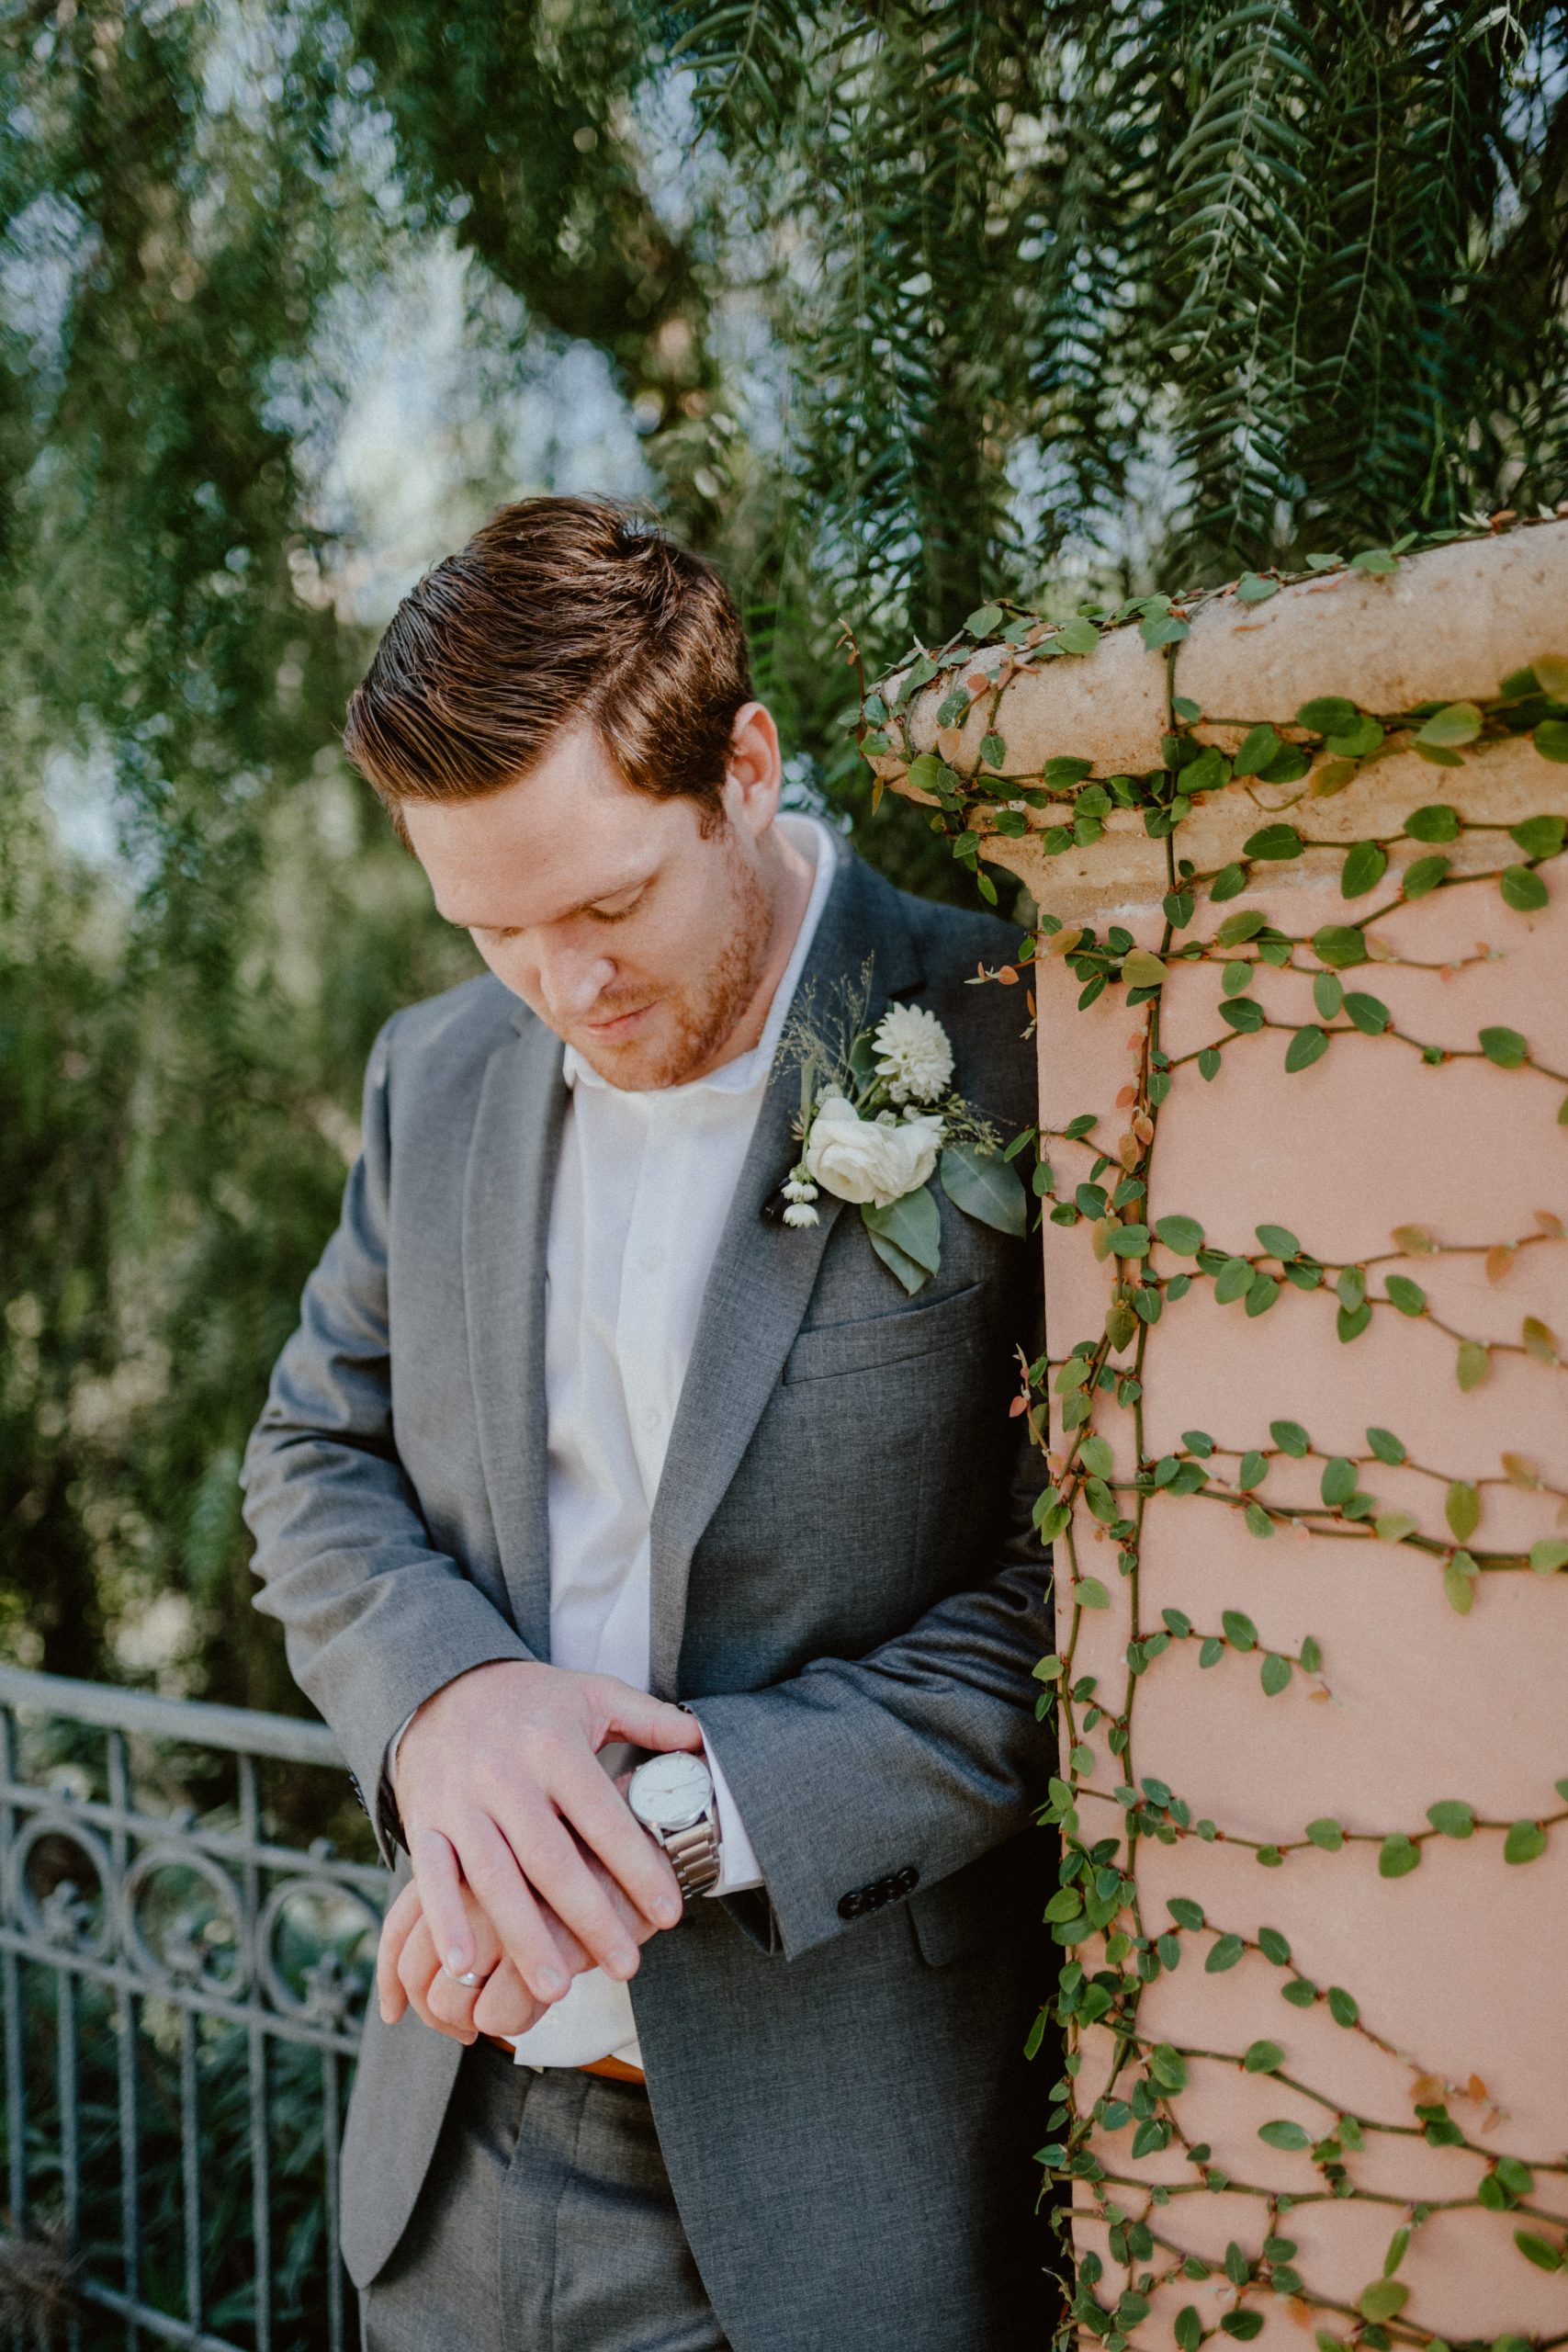 Groom style inspiration with grey suit with white floral boutonniere | San Diego Wedding Photographer, San Diego California Elopement Photographer, Destination Wedding Photographer, Destination Elopement Photographer, Newlywed moments ideas, Newlywed Photography inspiration, California Elopement ideas, San Diego Wedding Inspiration, Romantic Boho Wedding Ideas, Romantic Elopement Inspiration, Bohemian Wedding Ideas | chelseaabril.com